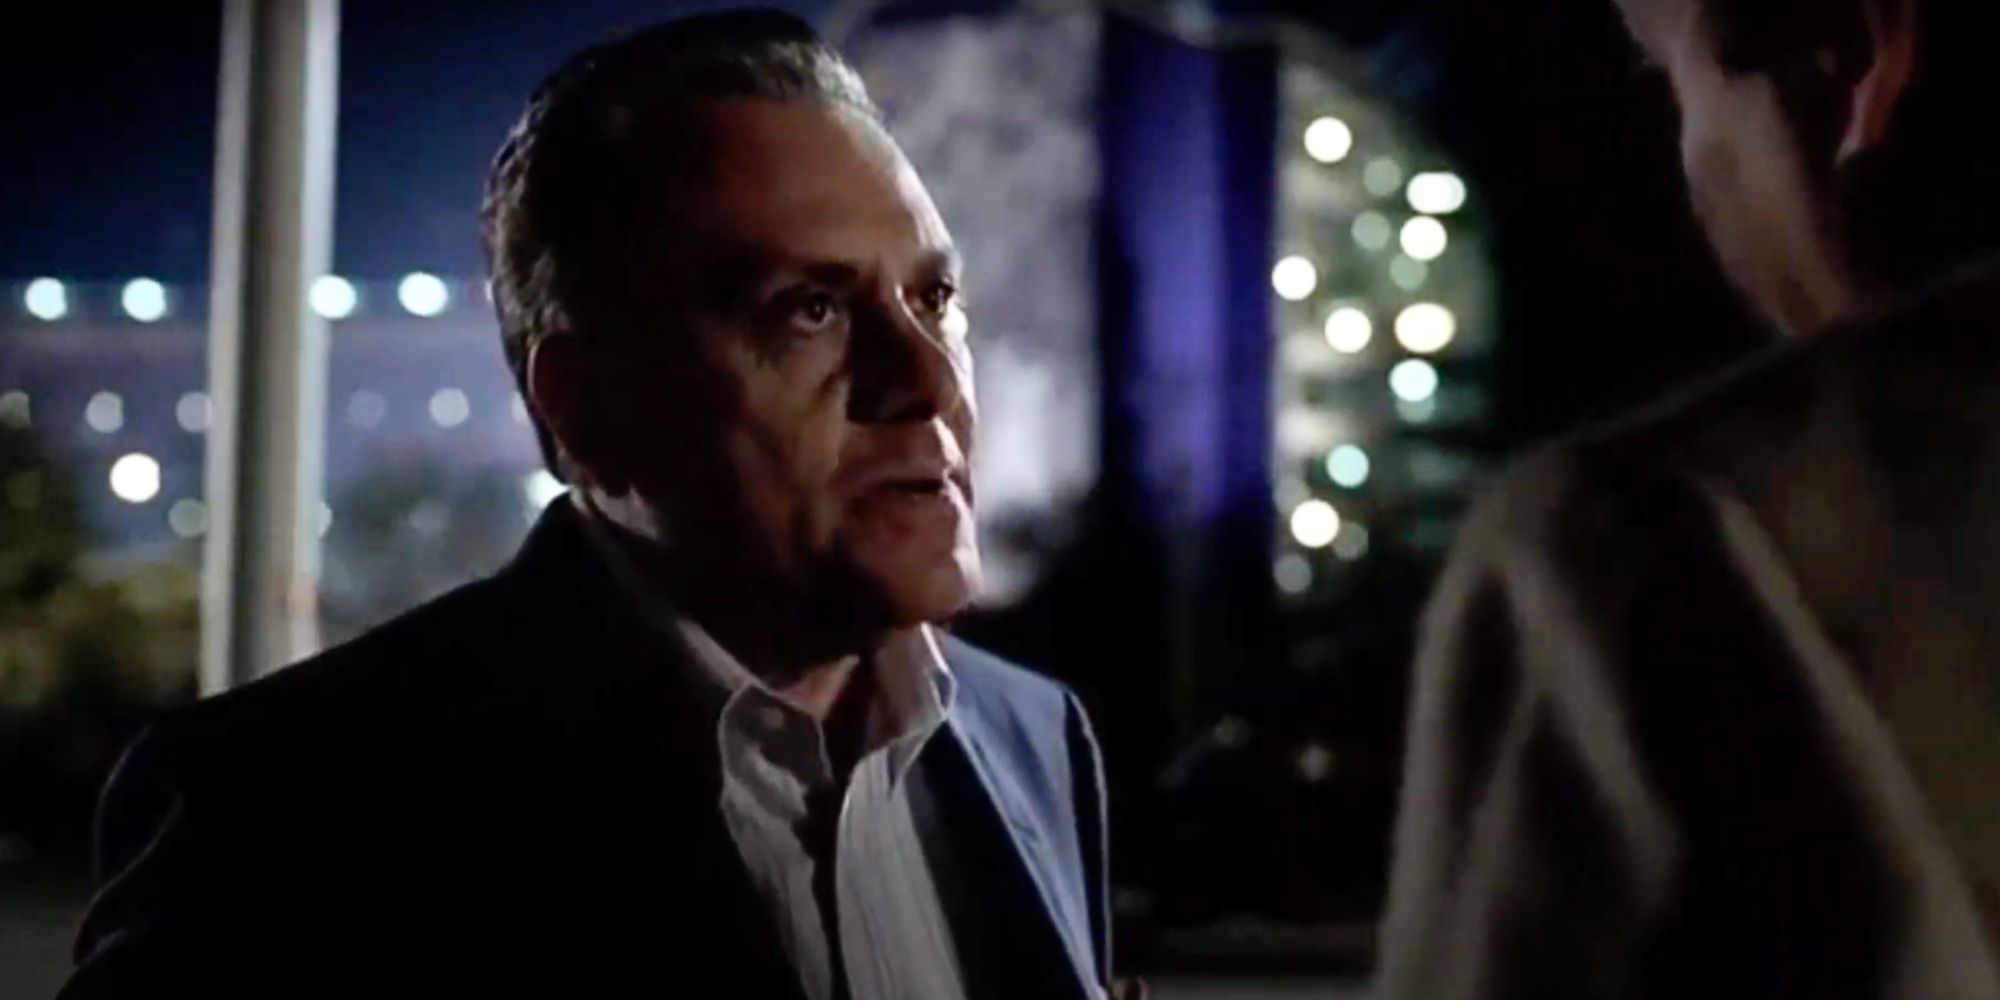 Vincent Curatola as Johnny Sack yelling in The Sopranos